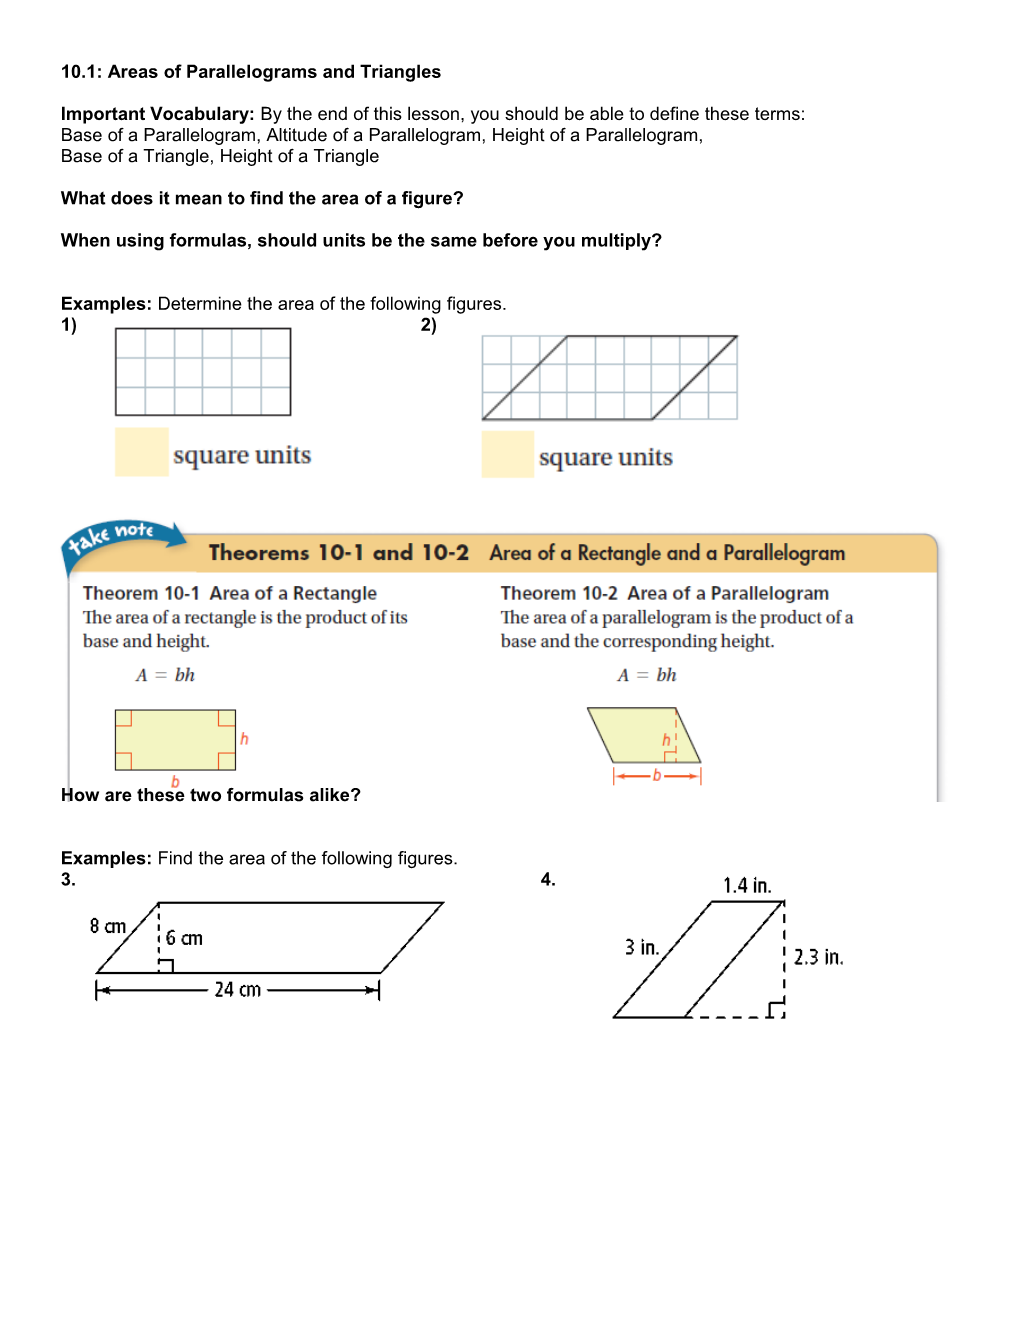 10.1: Areas of Parallelograms and Triangles